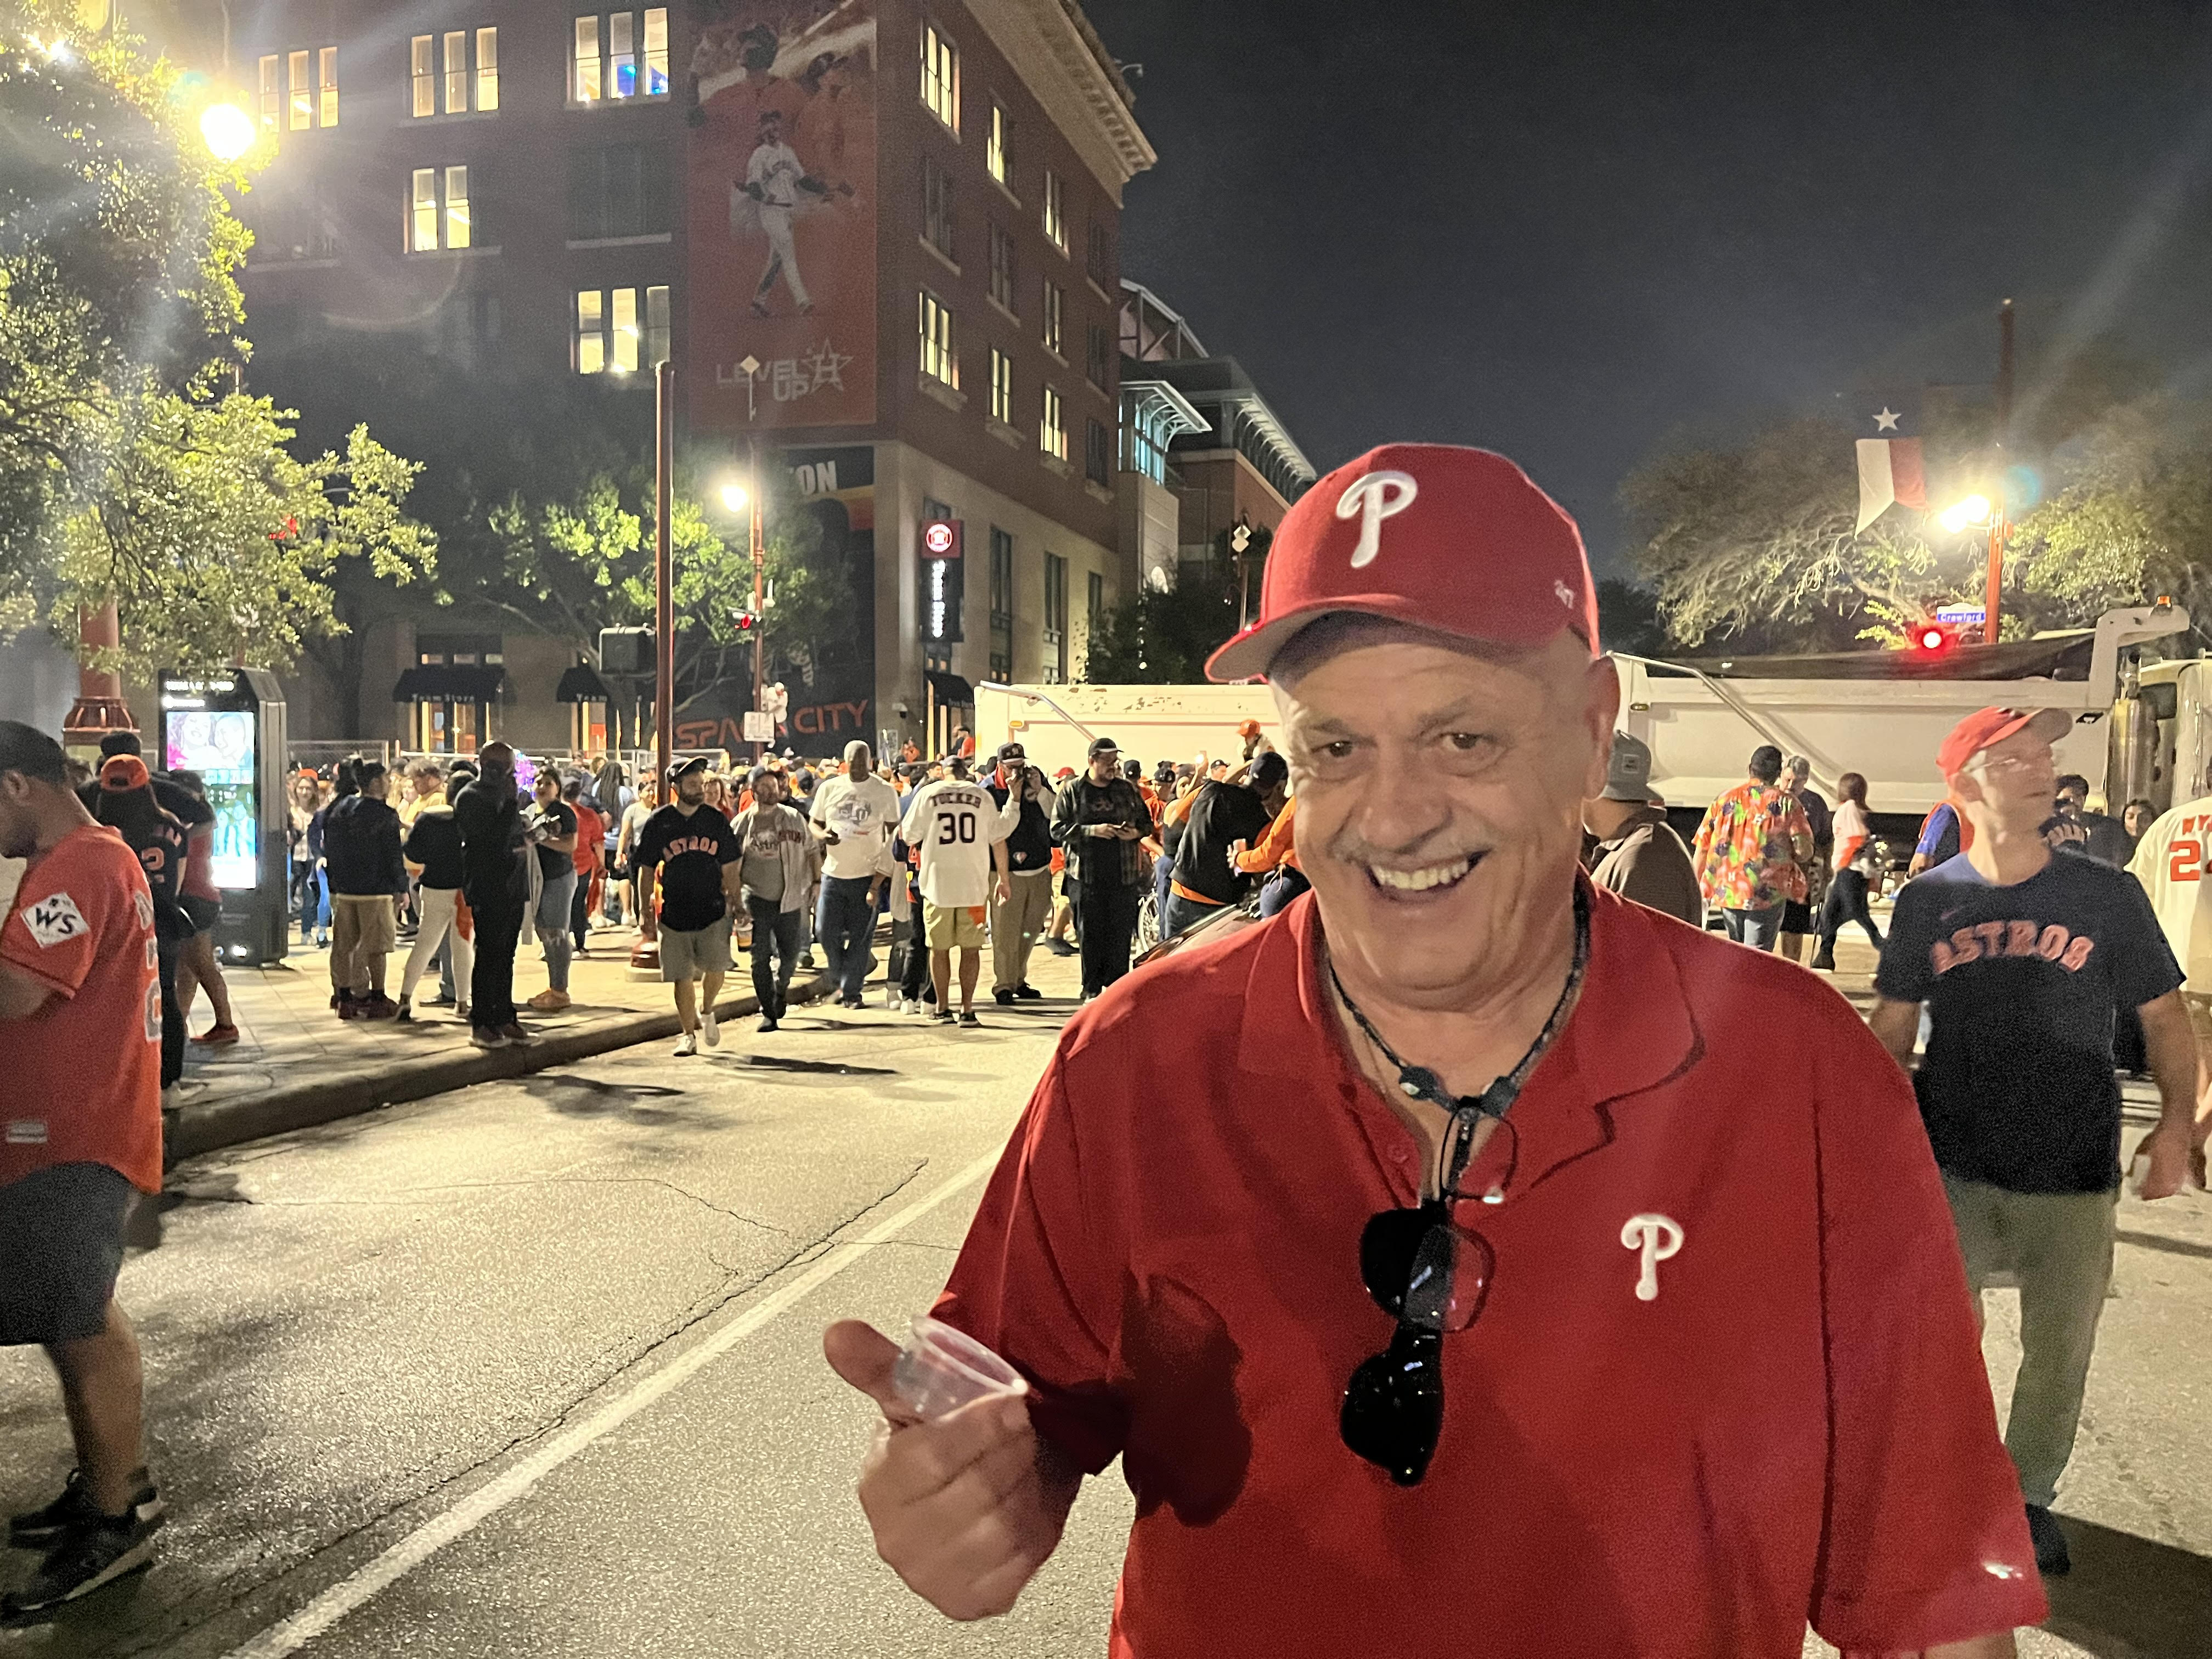 Philly fans in Houston mourn a World Series loss and look to the future